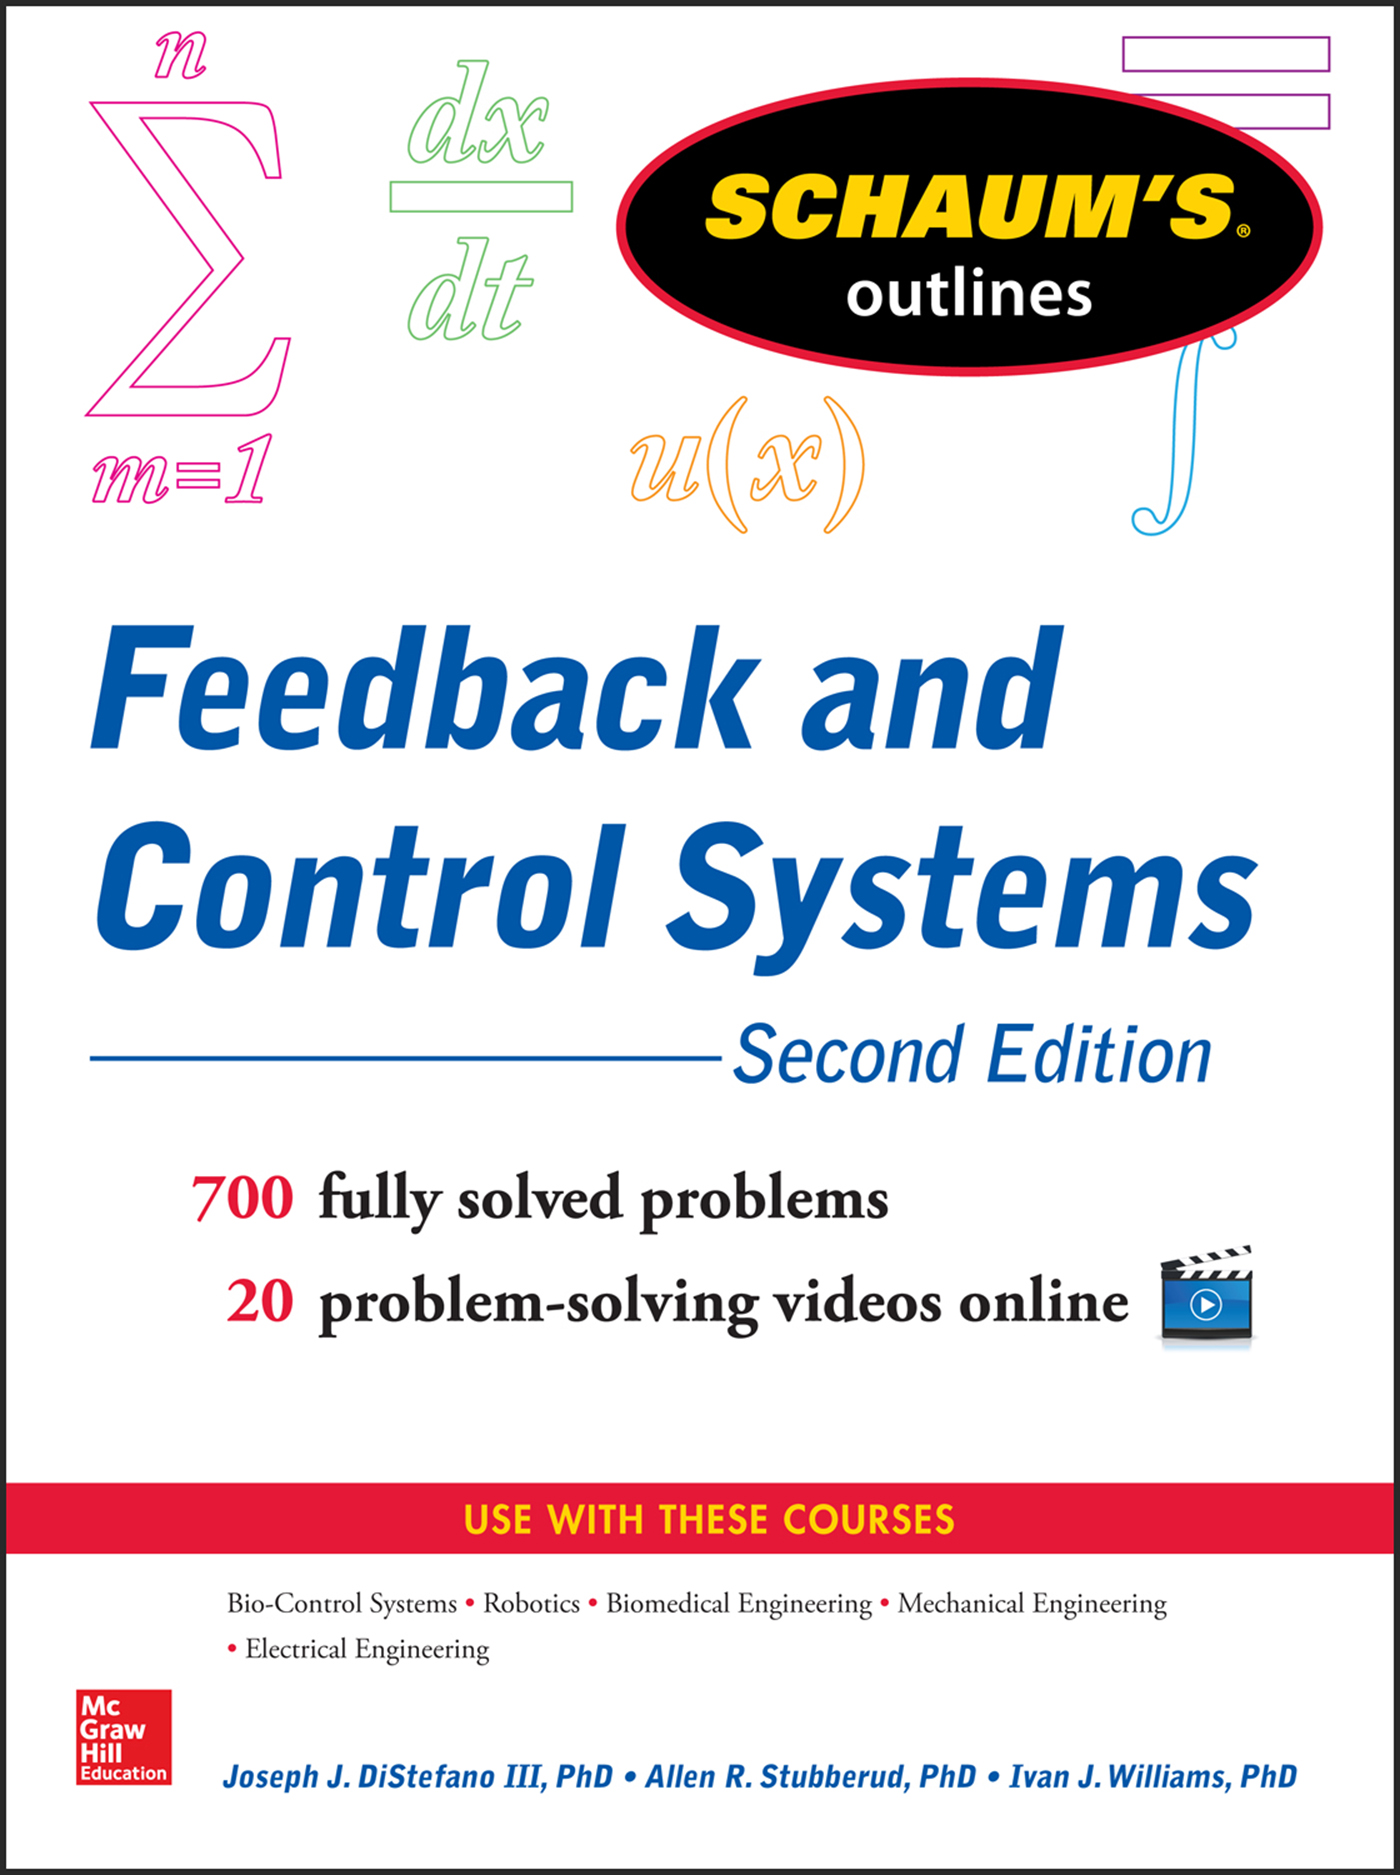 Schaumâ??s Outline of Feedback and Control Systems, 3rd Edition - 25-49.99